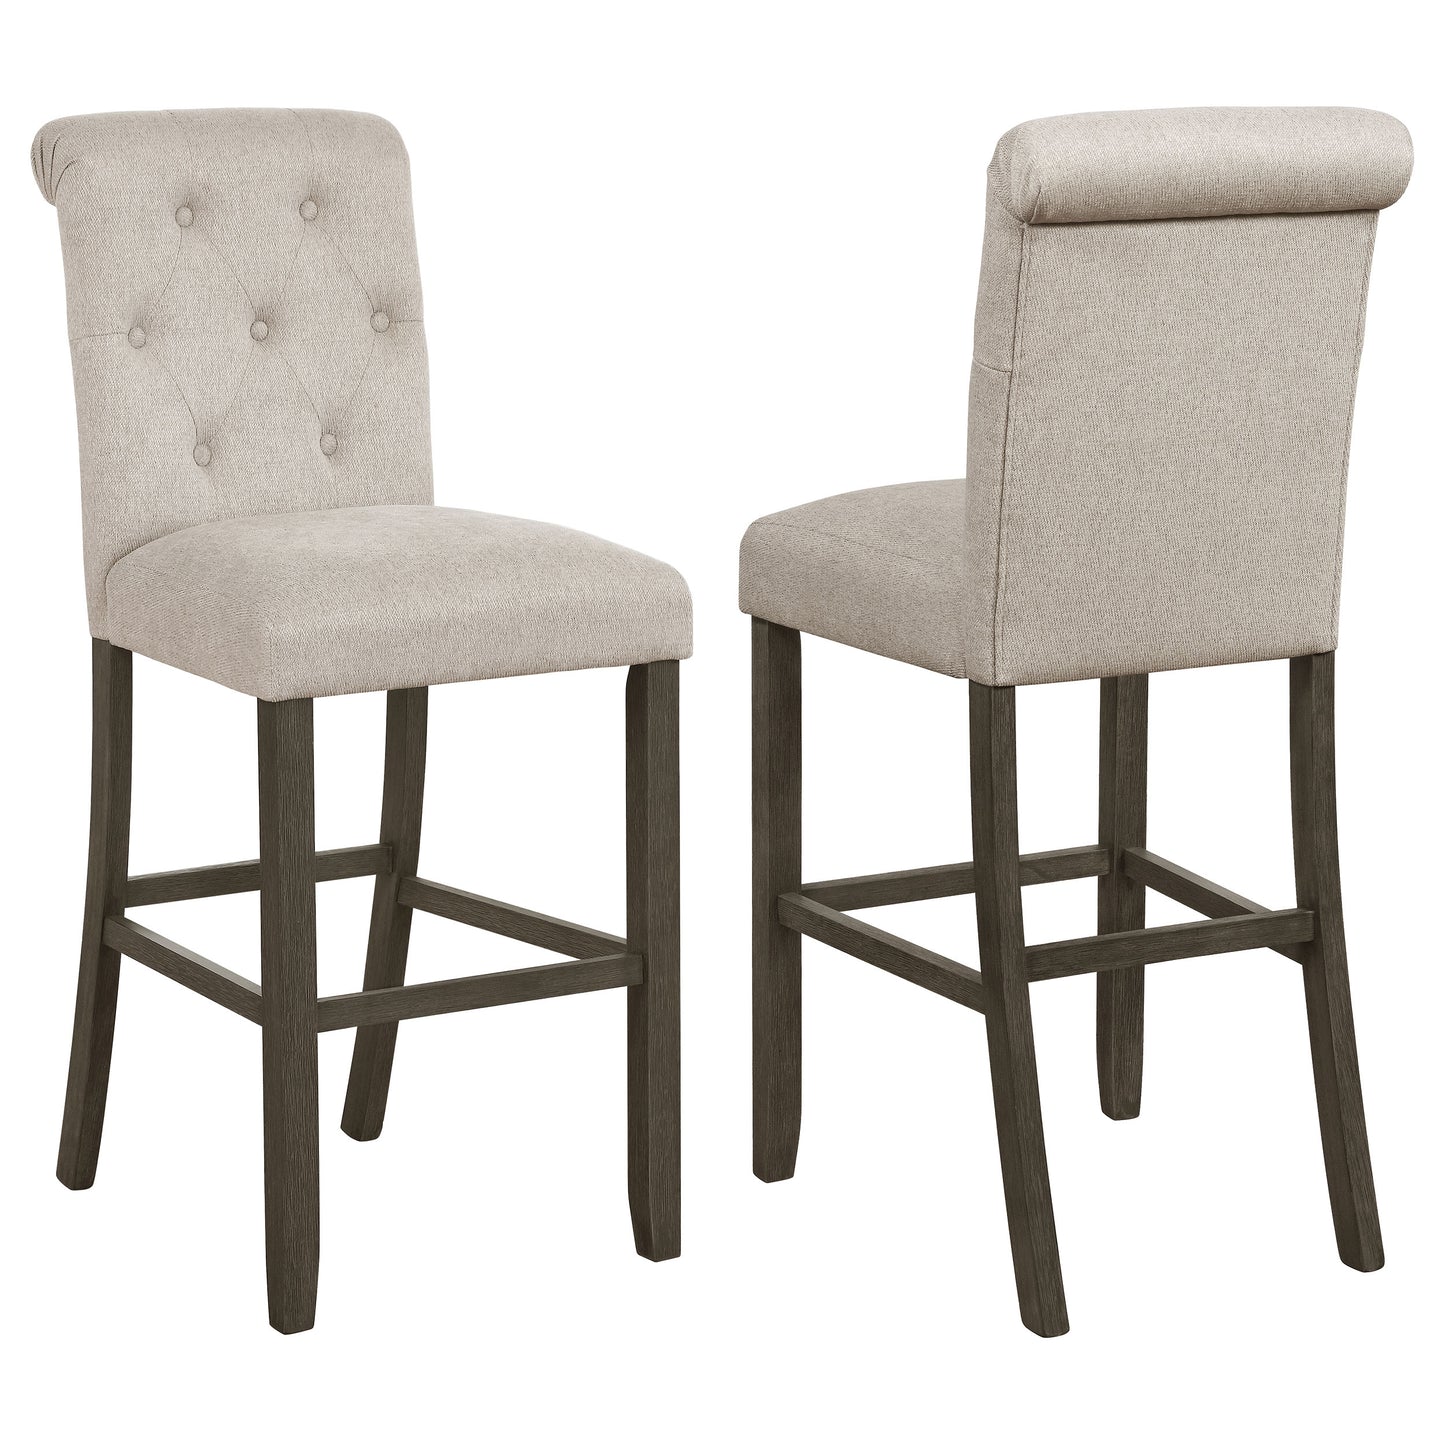 Balboa Tufted Back Bar Stools Beige and Rustic Brown (Set of 2)